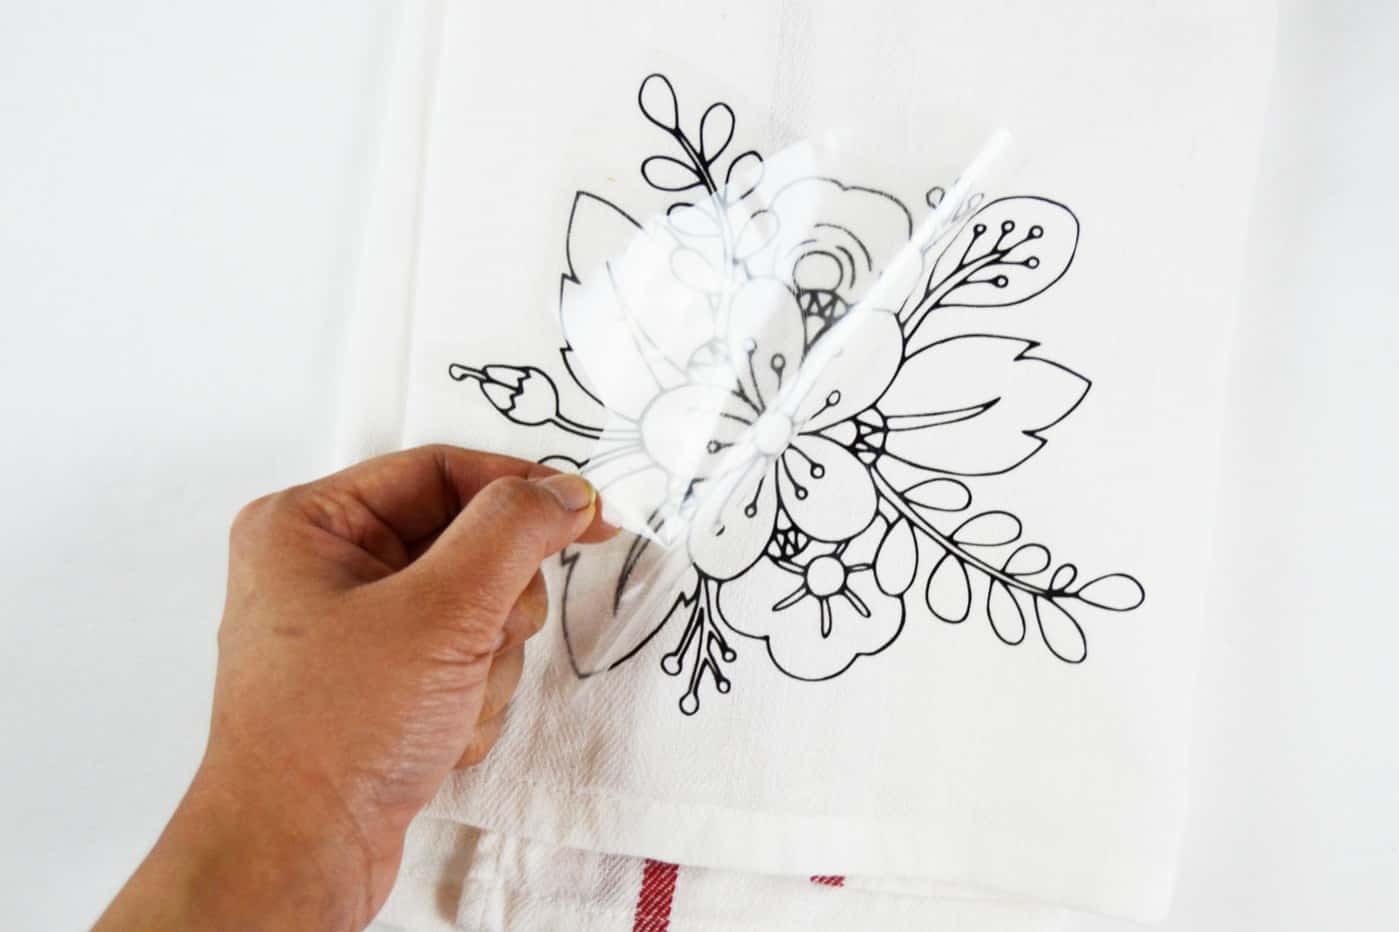 Adult coloring isn't just for the pages of a coloring book - use fabric markers on this DIY tea towel to make a unique Christmas, birthday, or hostess gift personalized with color! Great Silhouette or Cricut project.